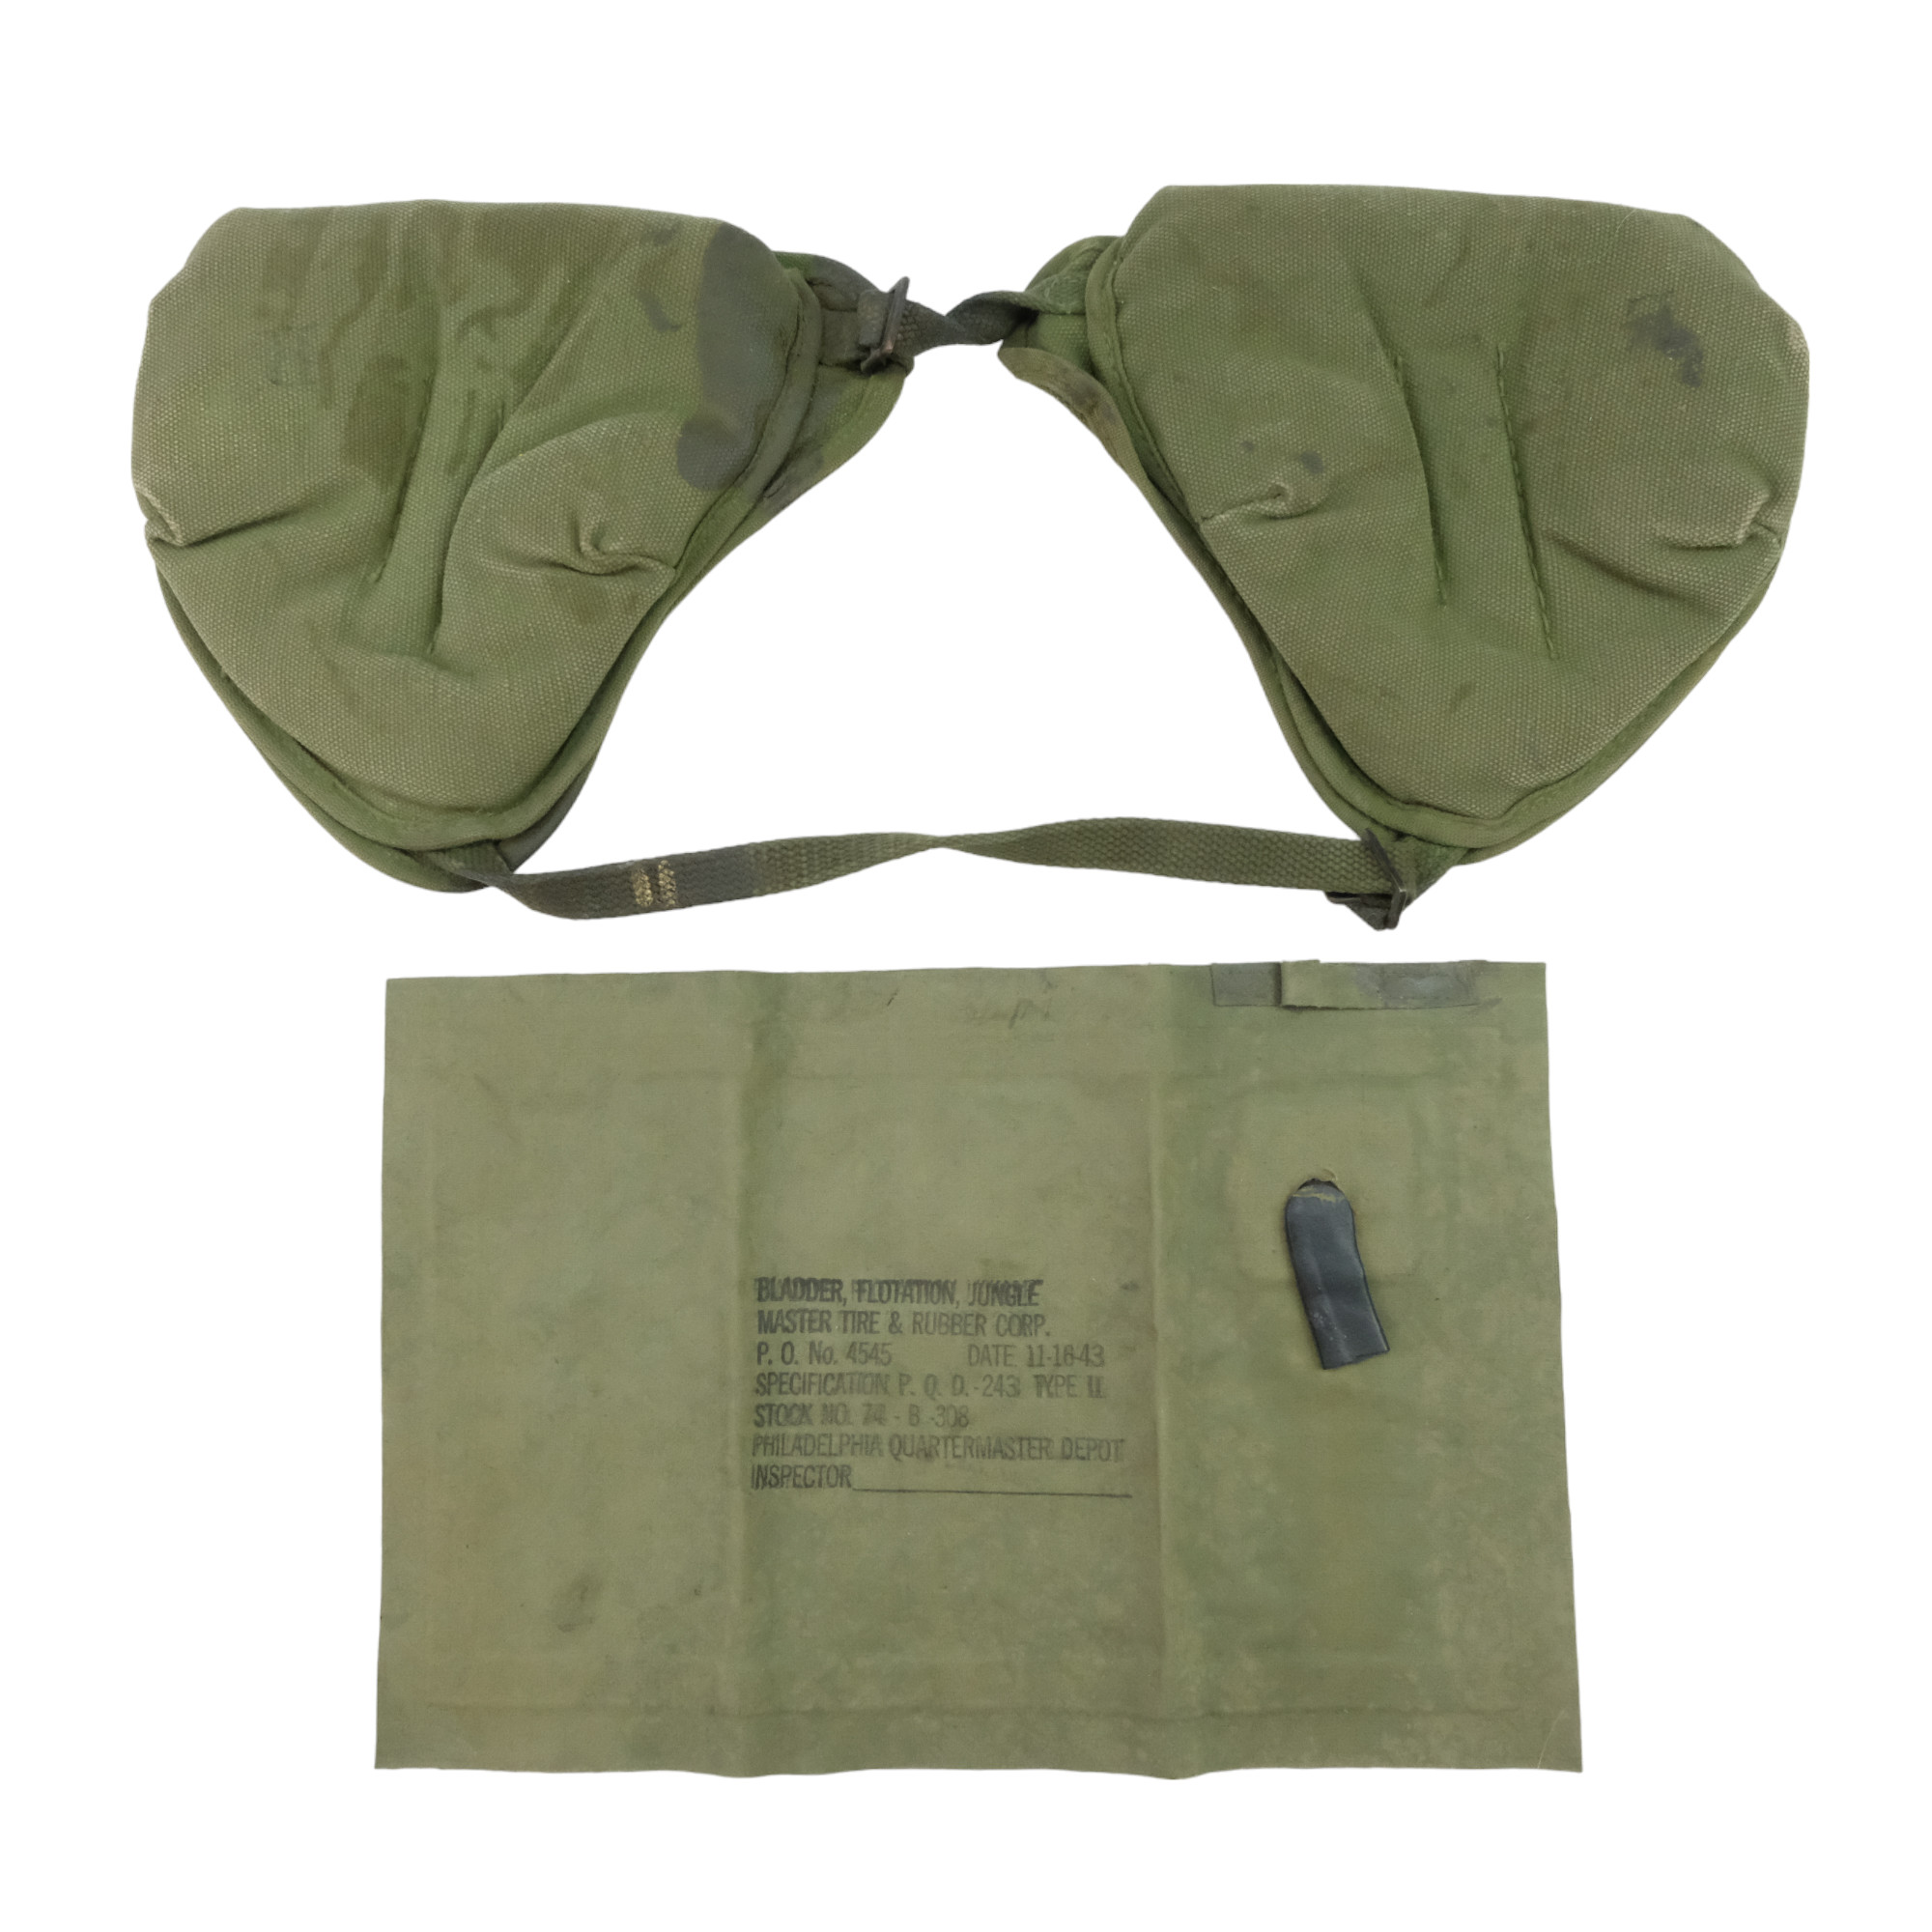 A set of Second World War US Army mortar crewman's M2 Shoulder Pads together with a Jungle Flotation